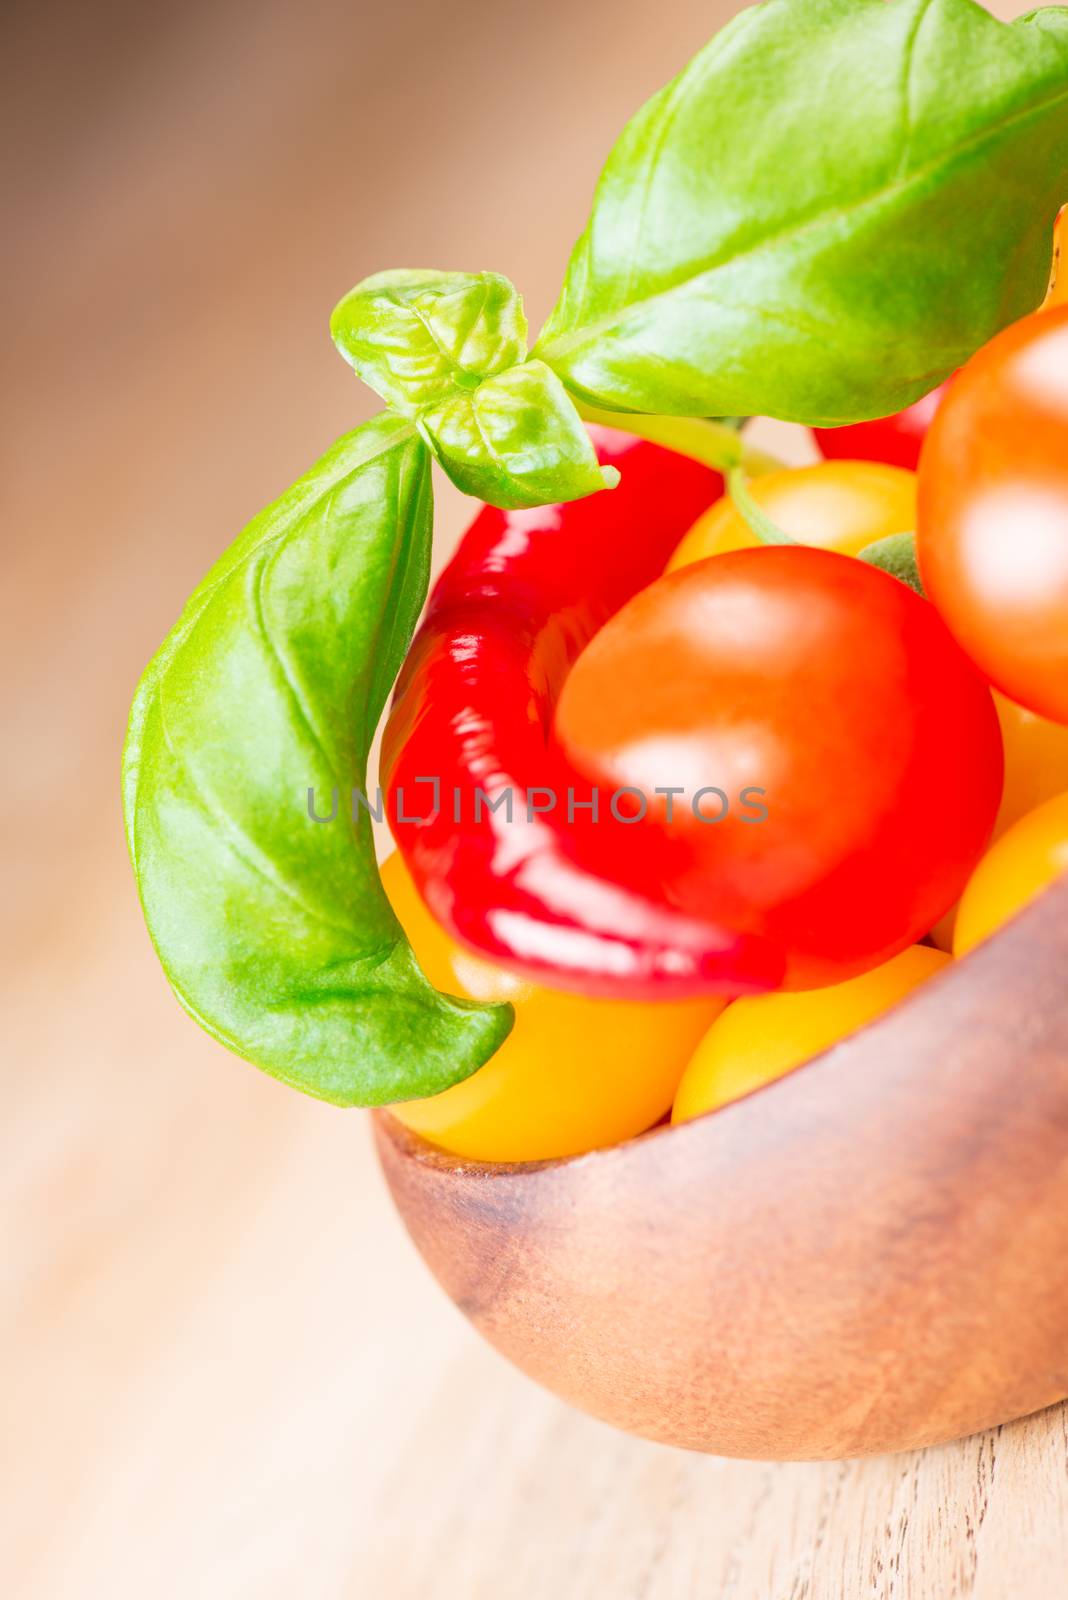 basil leafs with cherry tomatoes and pepper in wooden bowl by Nanisimova